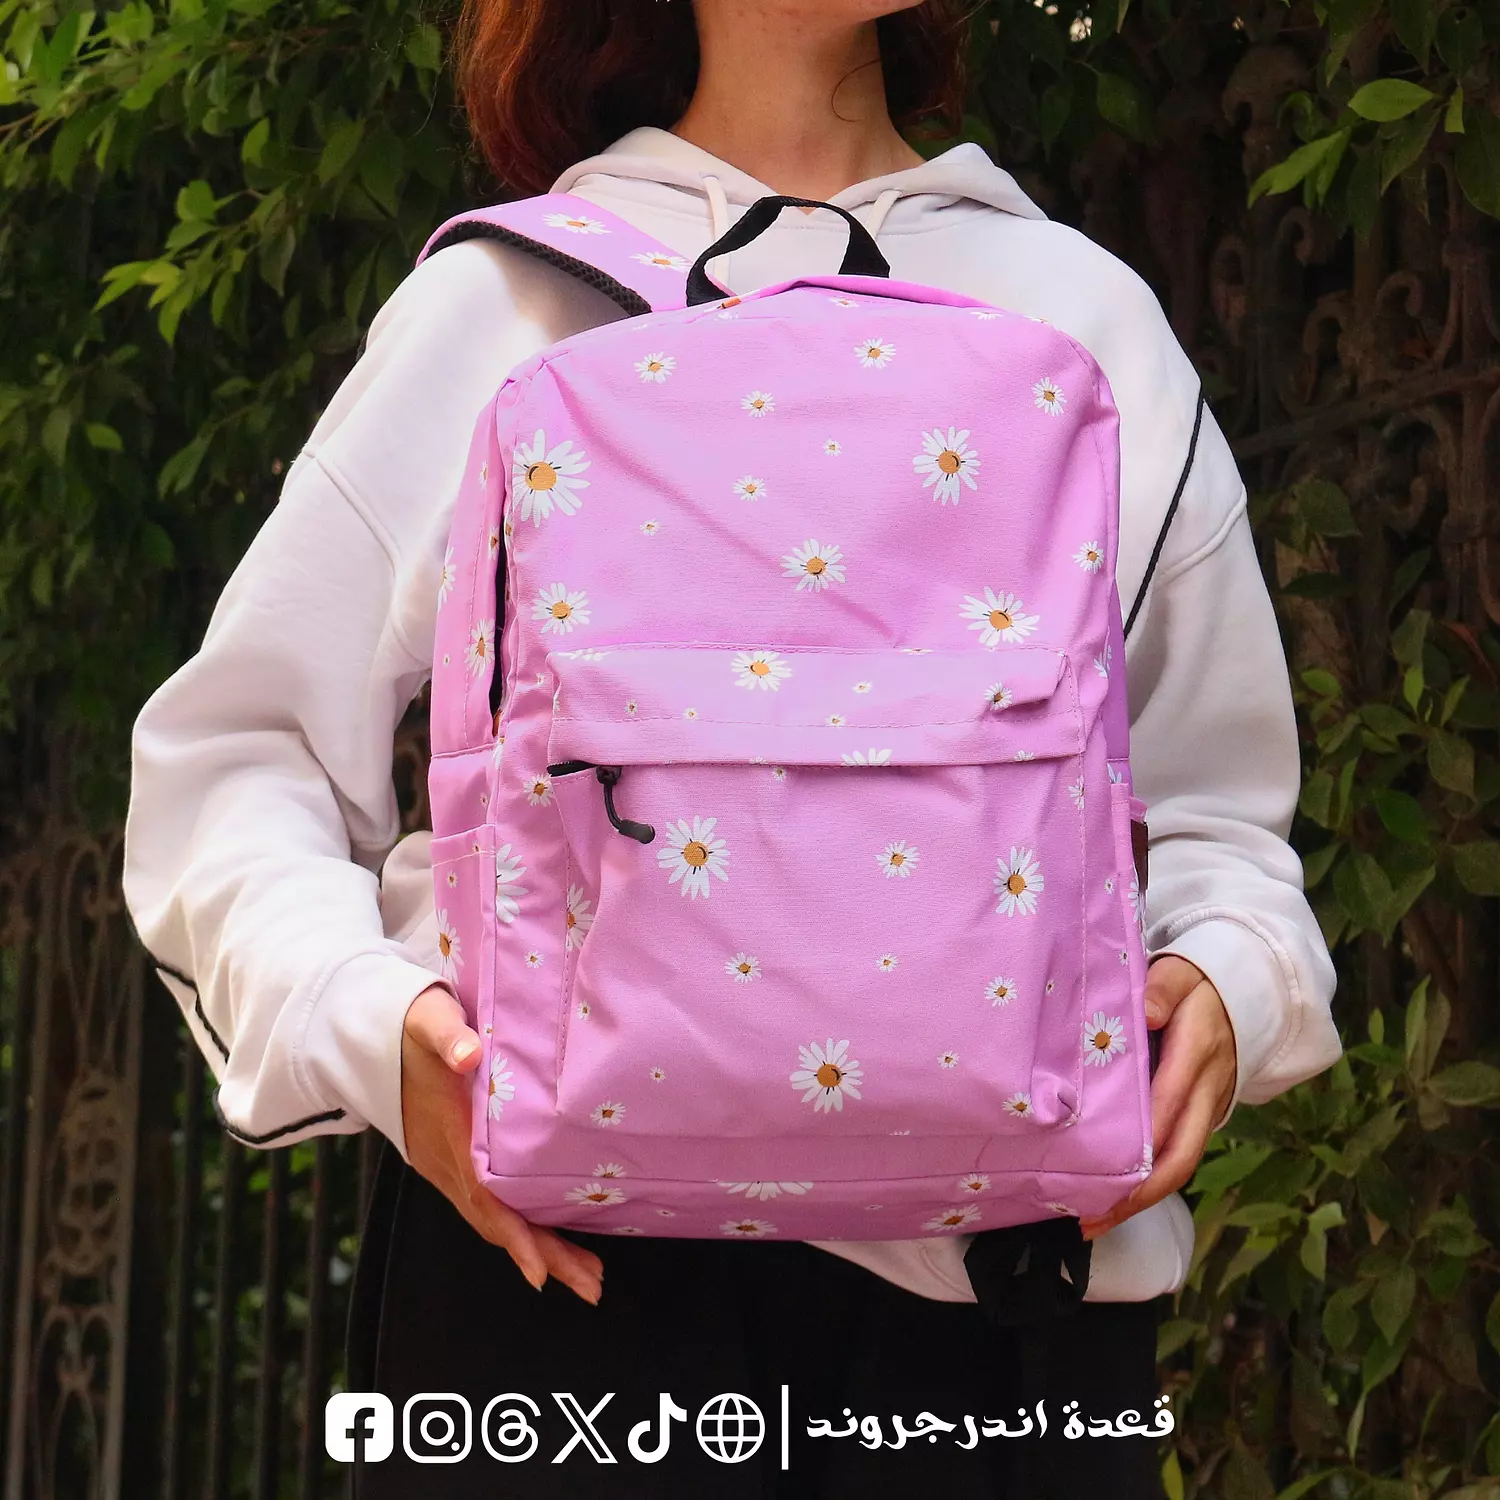 Pink Daisy 🌸 Backpack 🎒 0